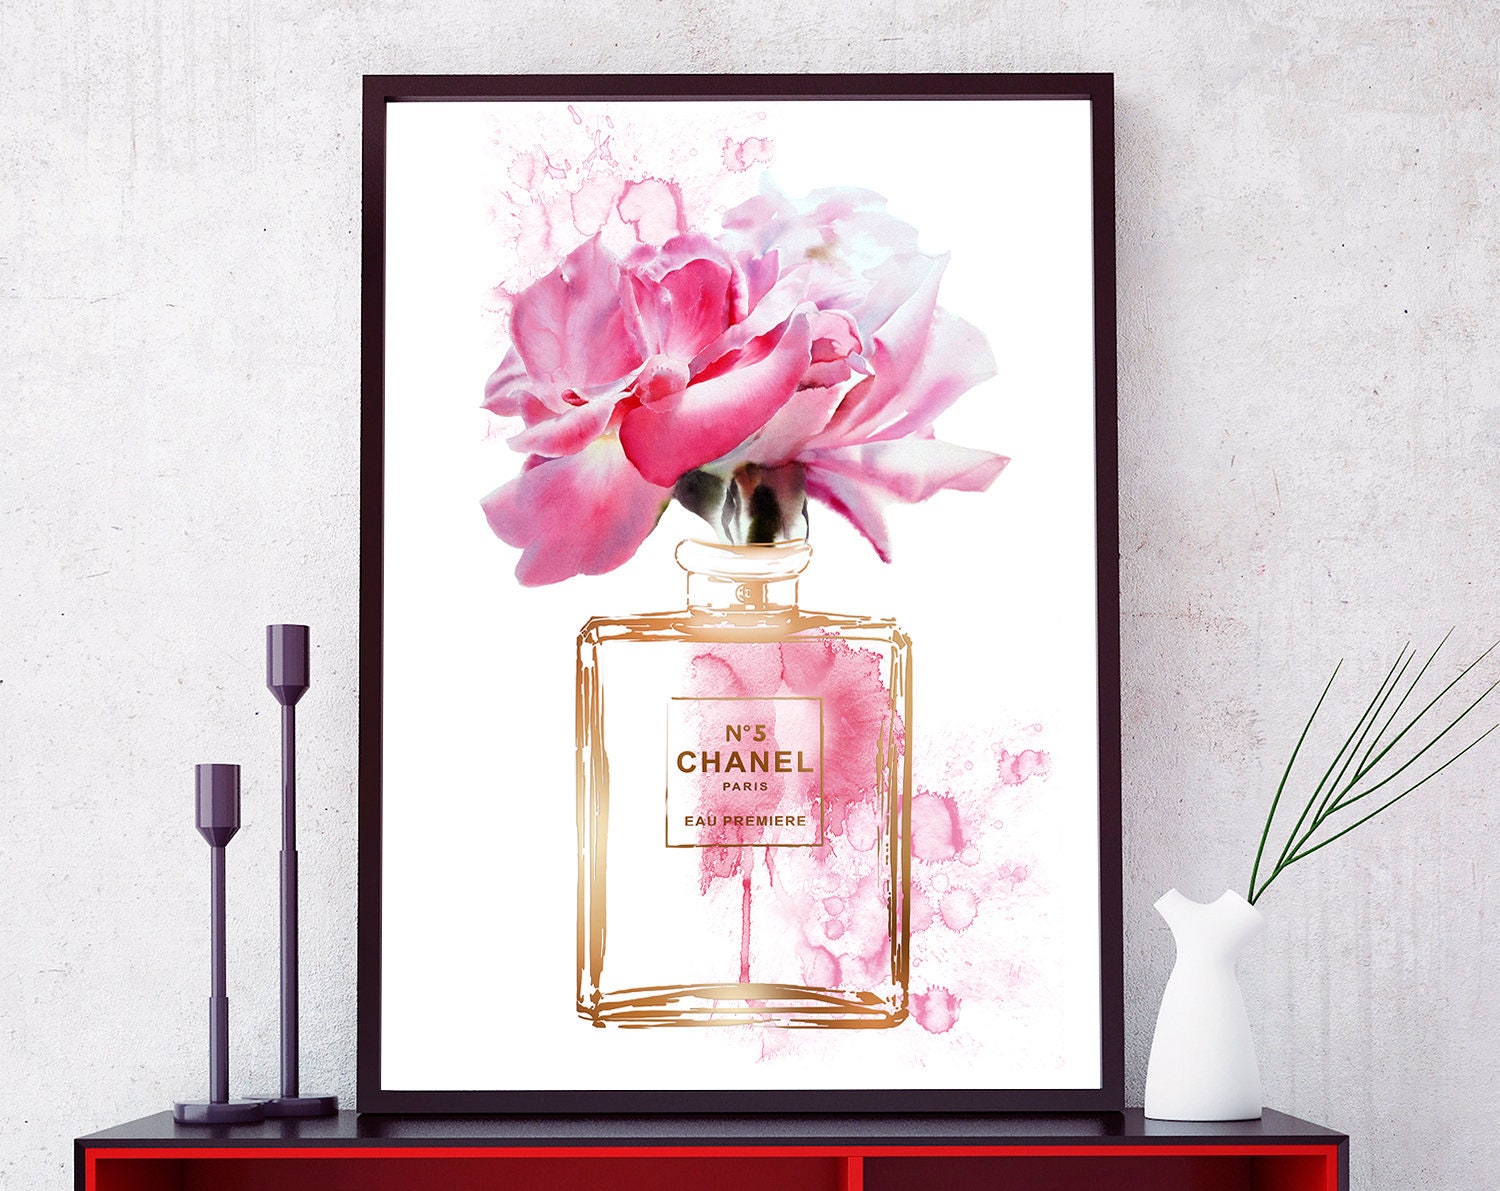 Perfume bottle art print inspired by Coco Chanel. Fashion | Etsy